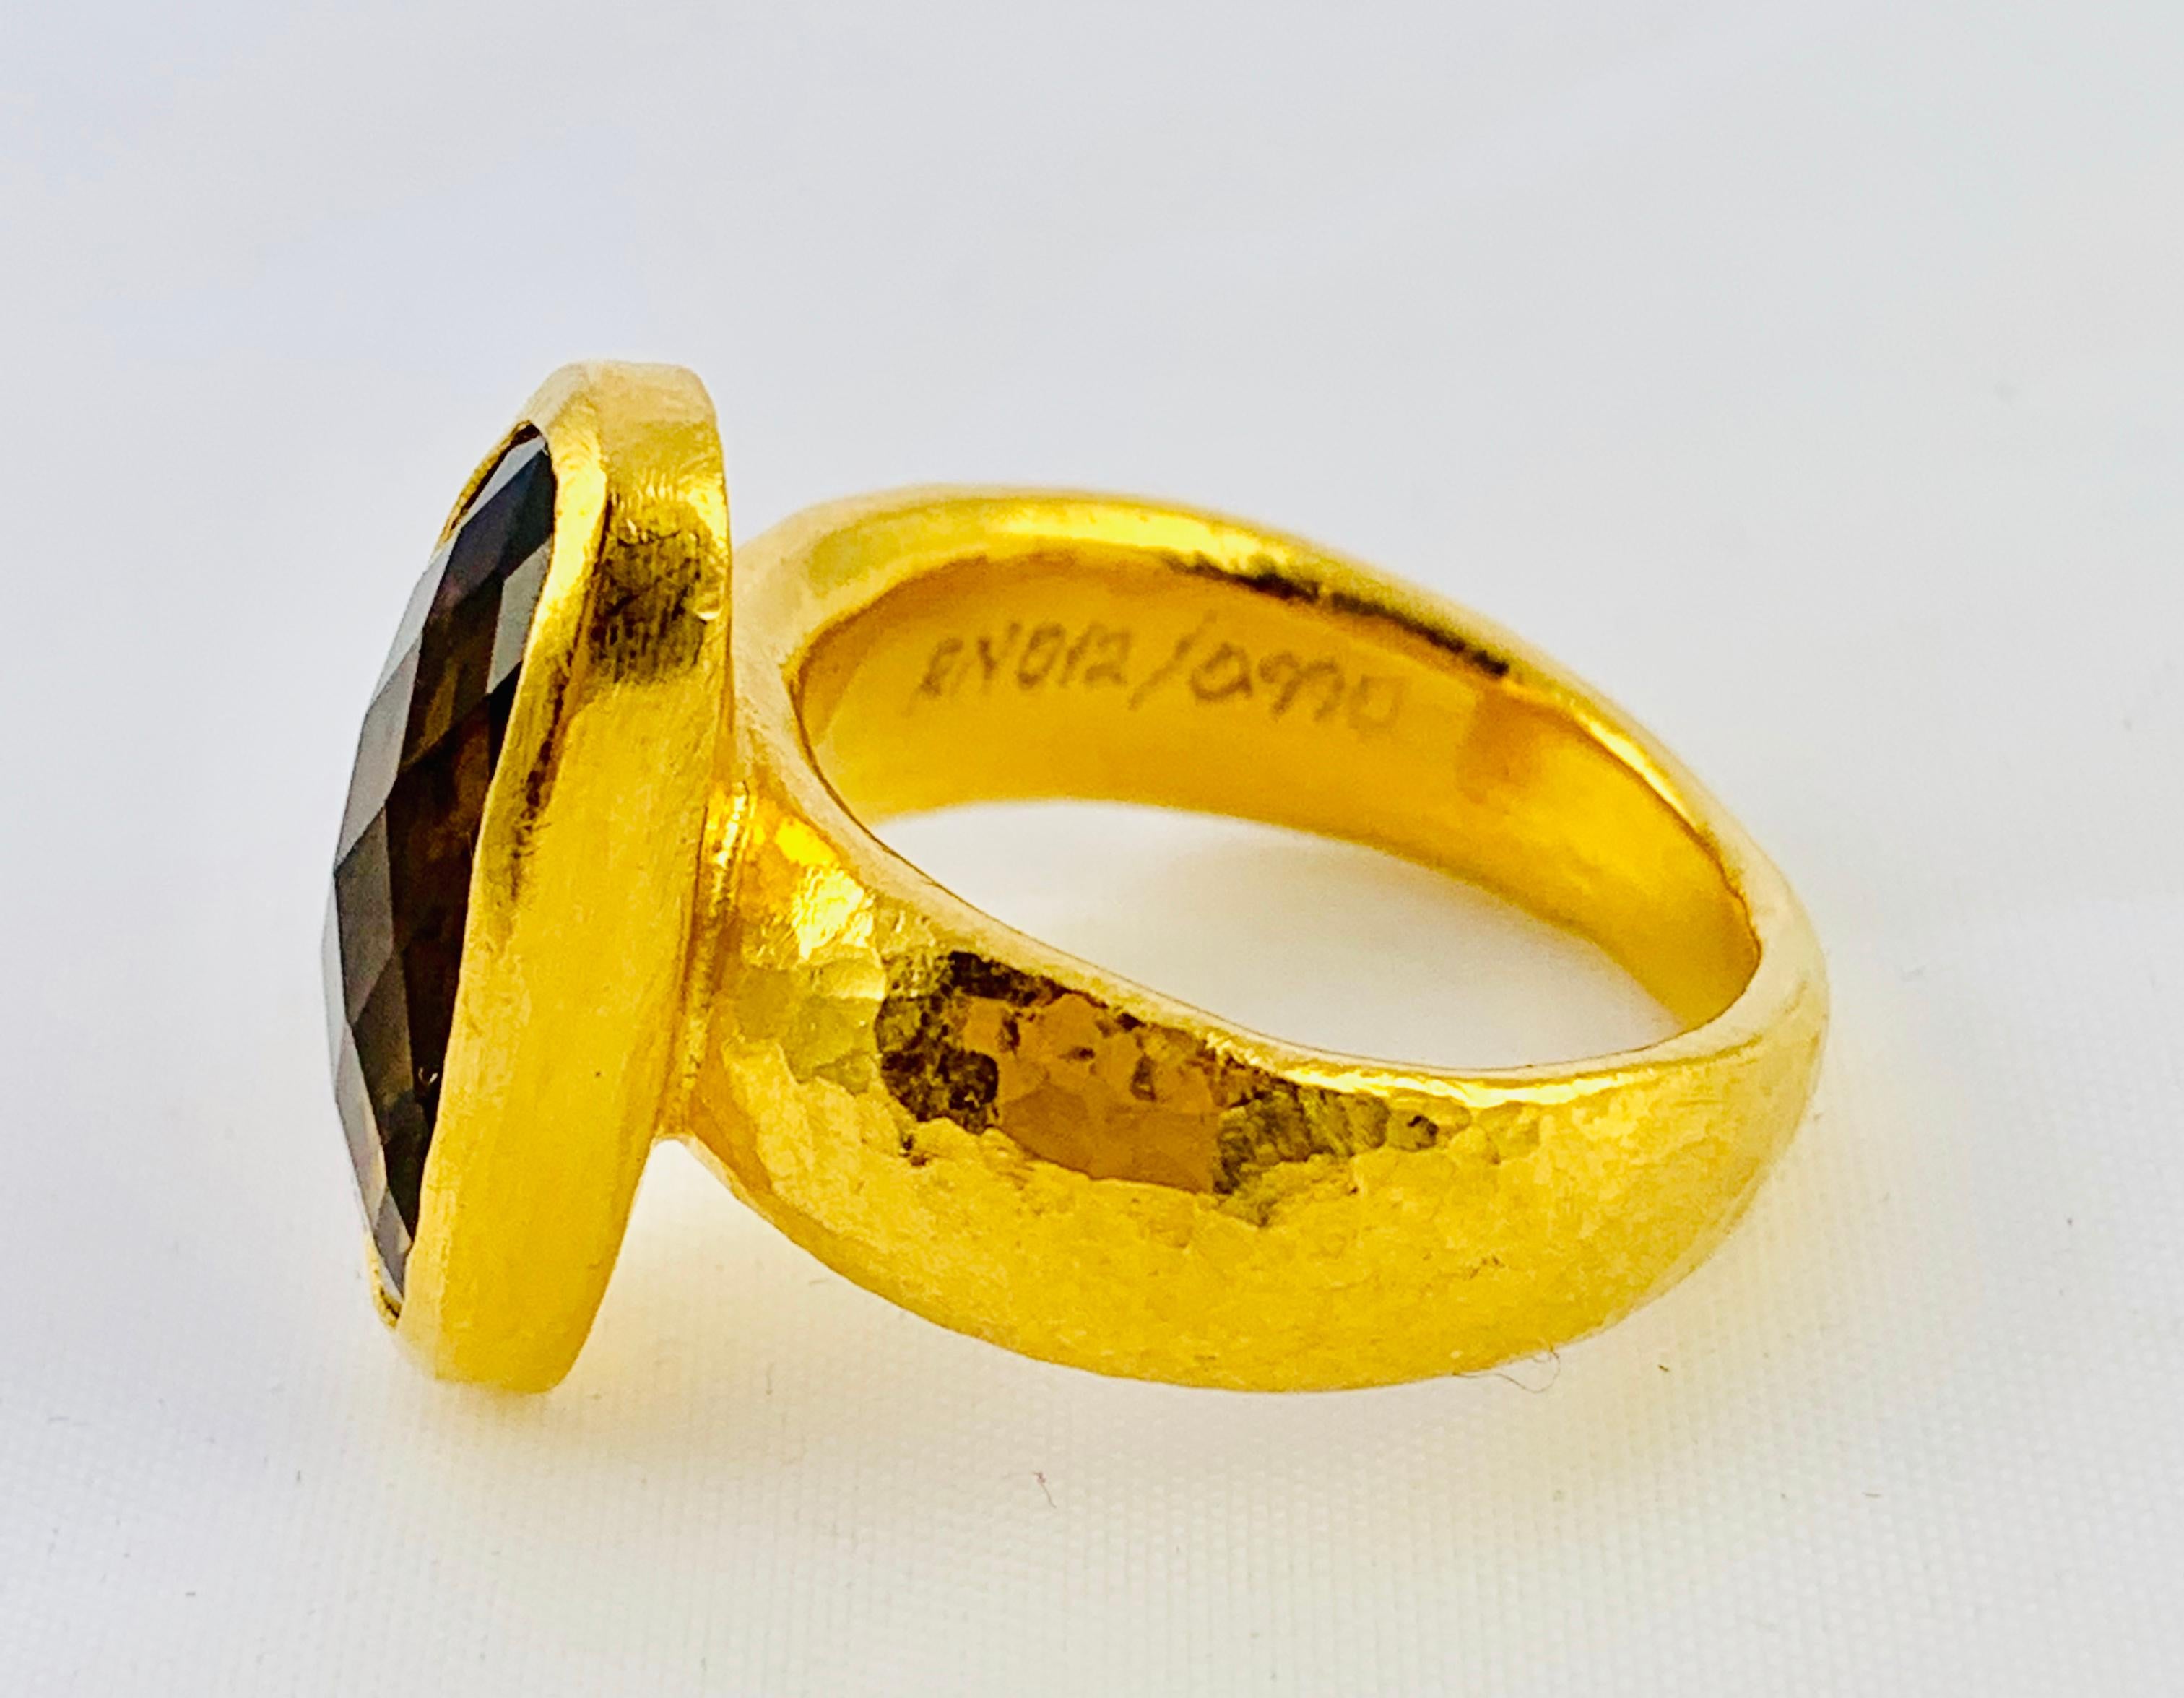 Gorgeous Designer Gurhan Hammered 24K yellow Gold And Smoky Topaz Ring! It weighs 8.8 grams and is size 5.75. The Topaz measures 6.6mm by 16.68mm and the band is 7.2mm wide.. Per the Gurhan website:
